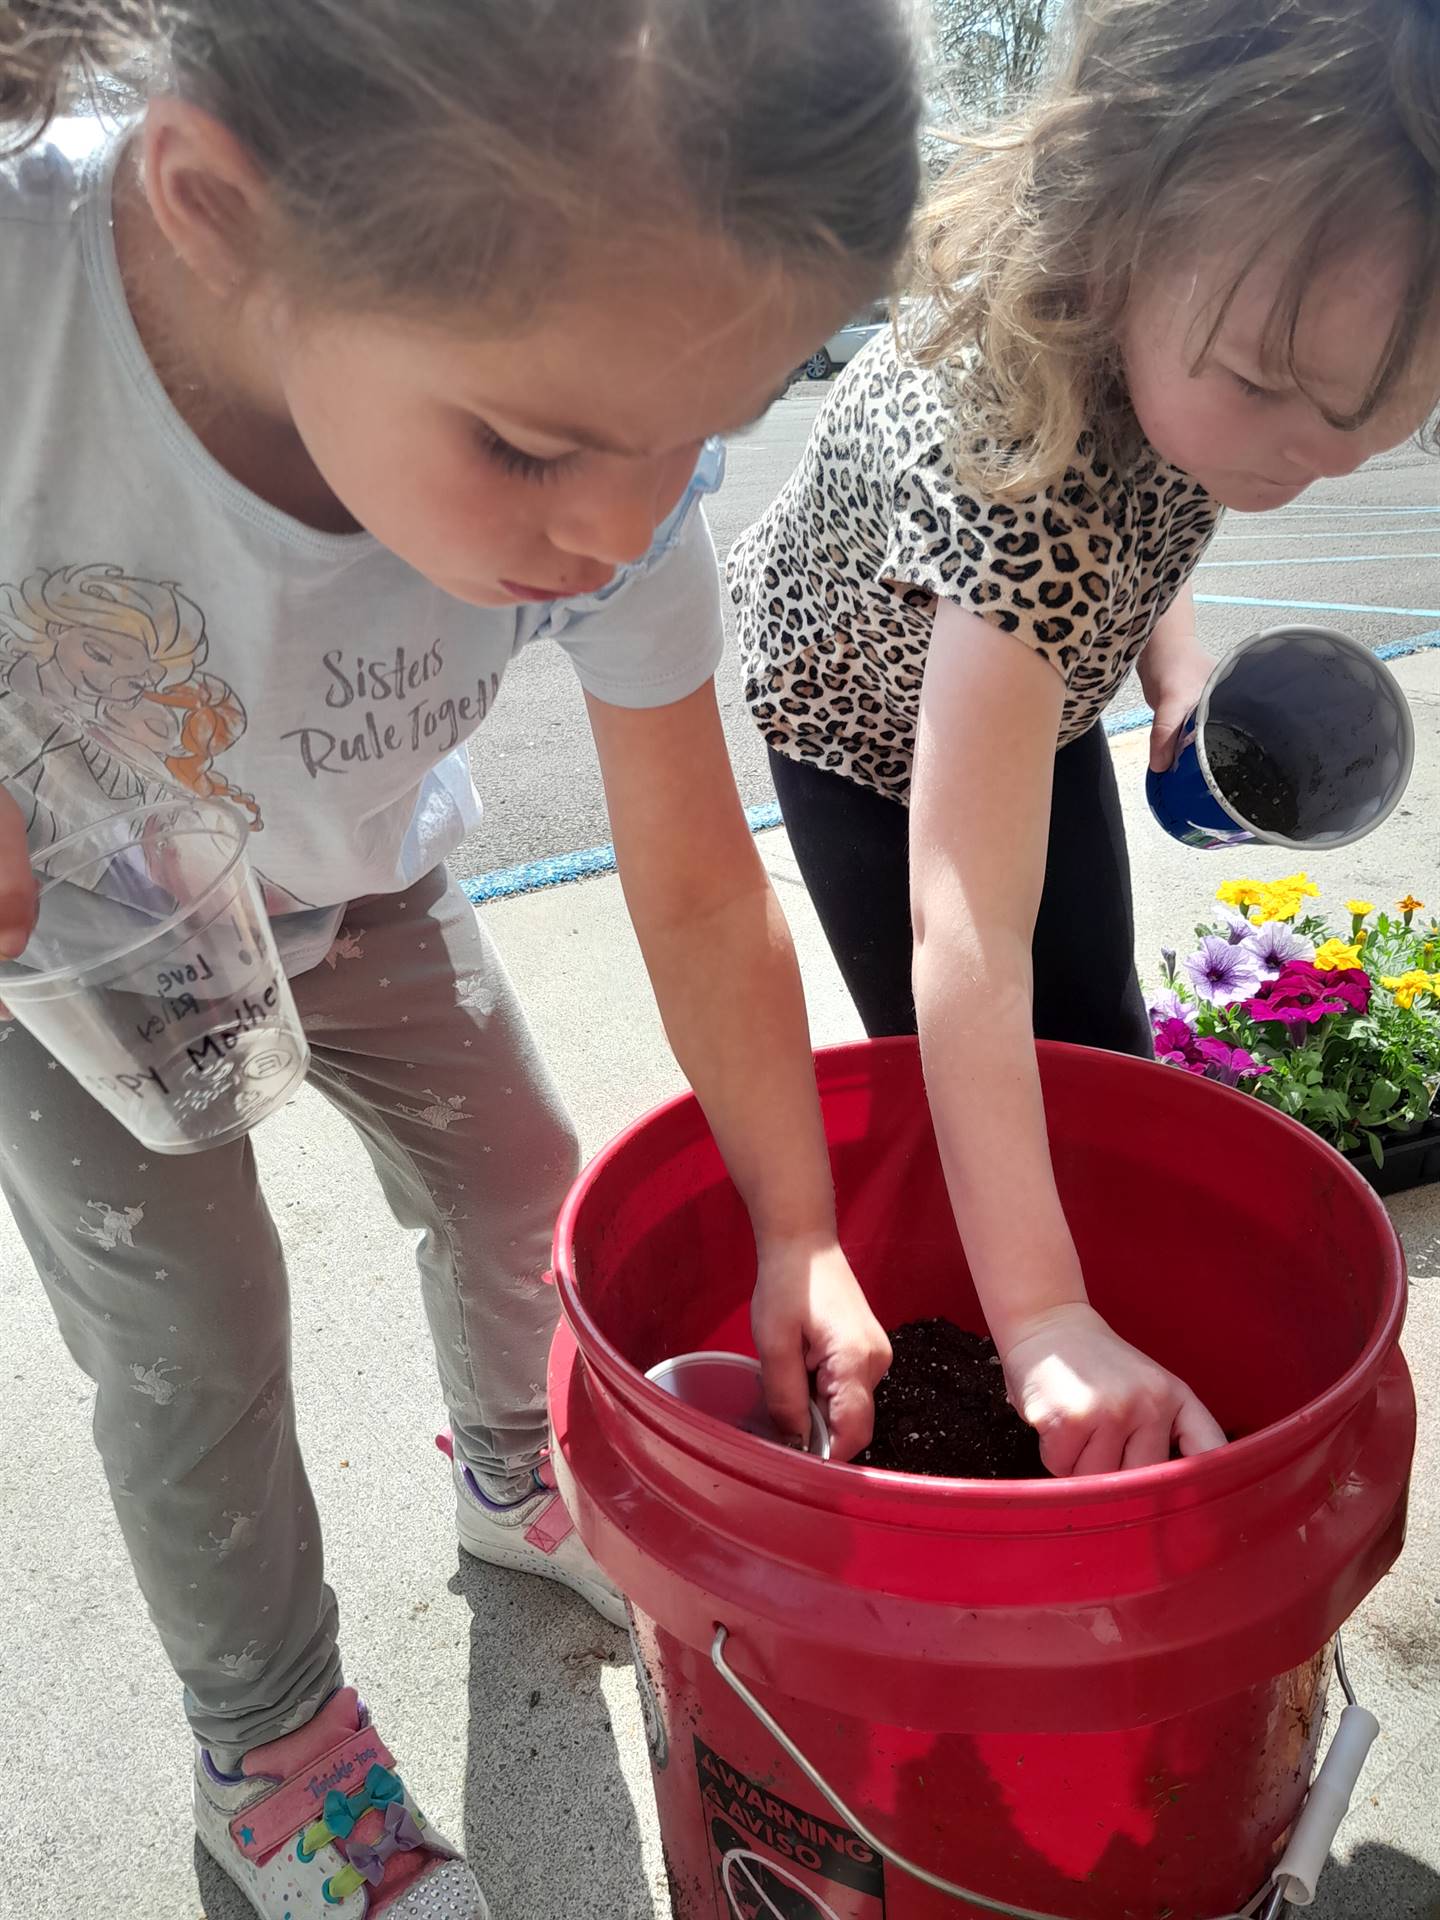 2 students are digging soil from a bucket